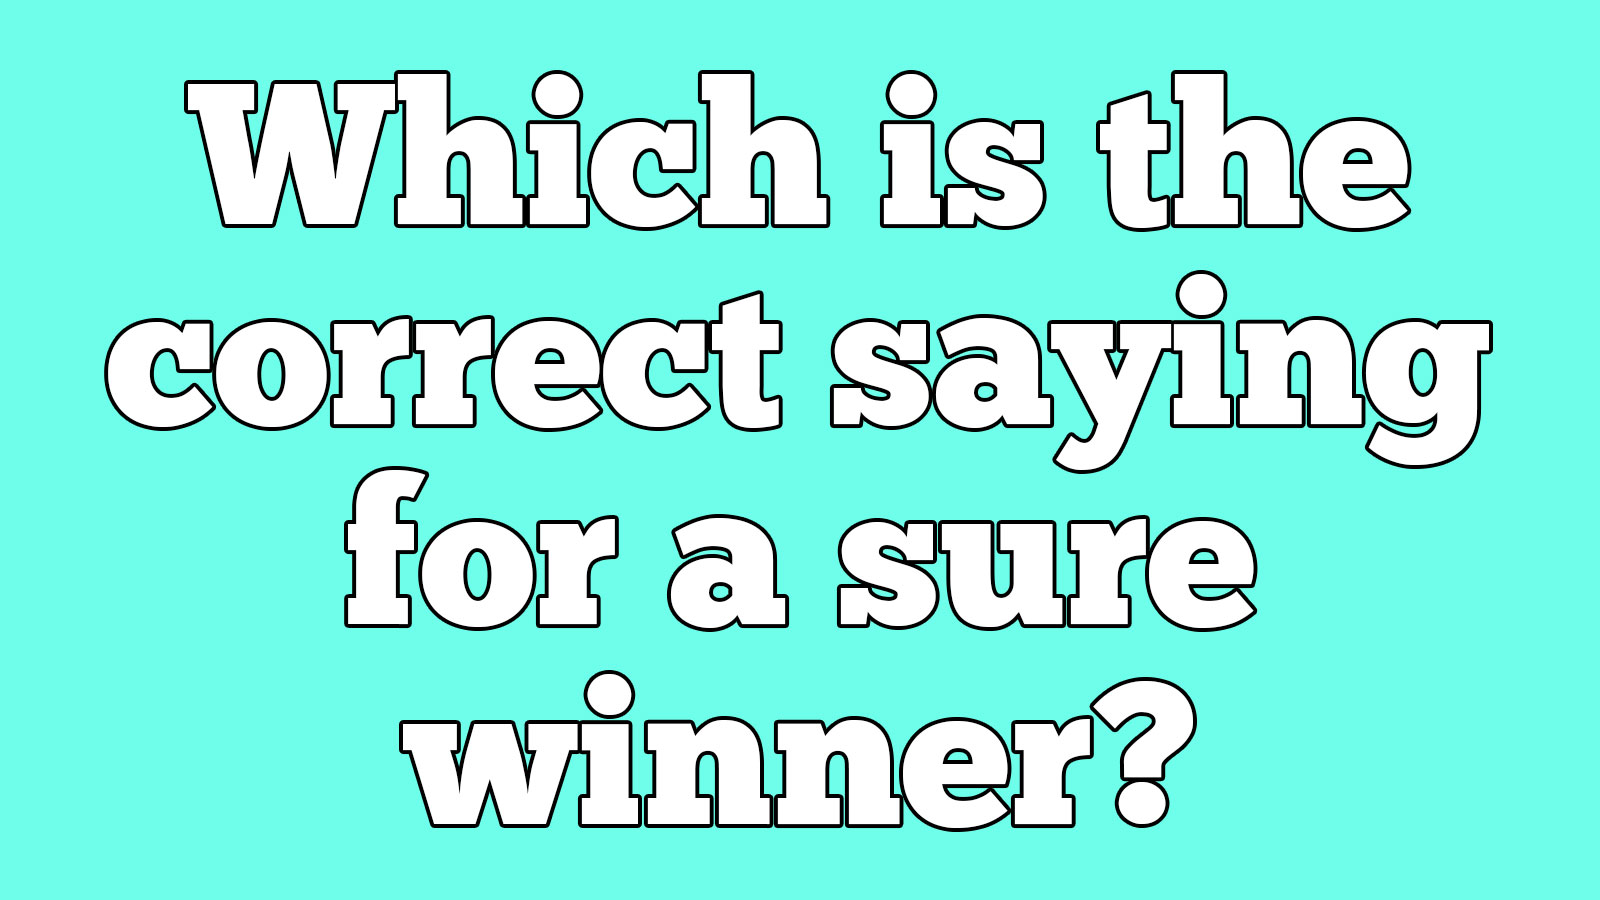 Can You Beat the Average Person in This English Word Quiz? 633